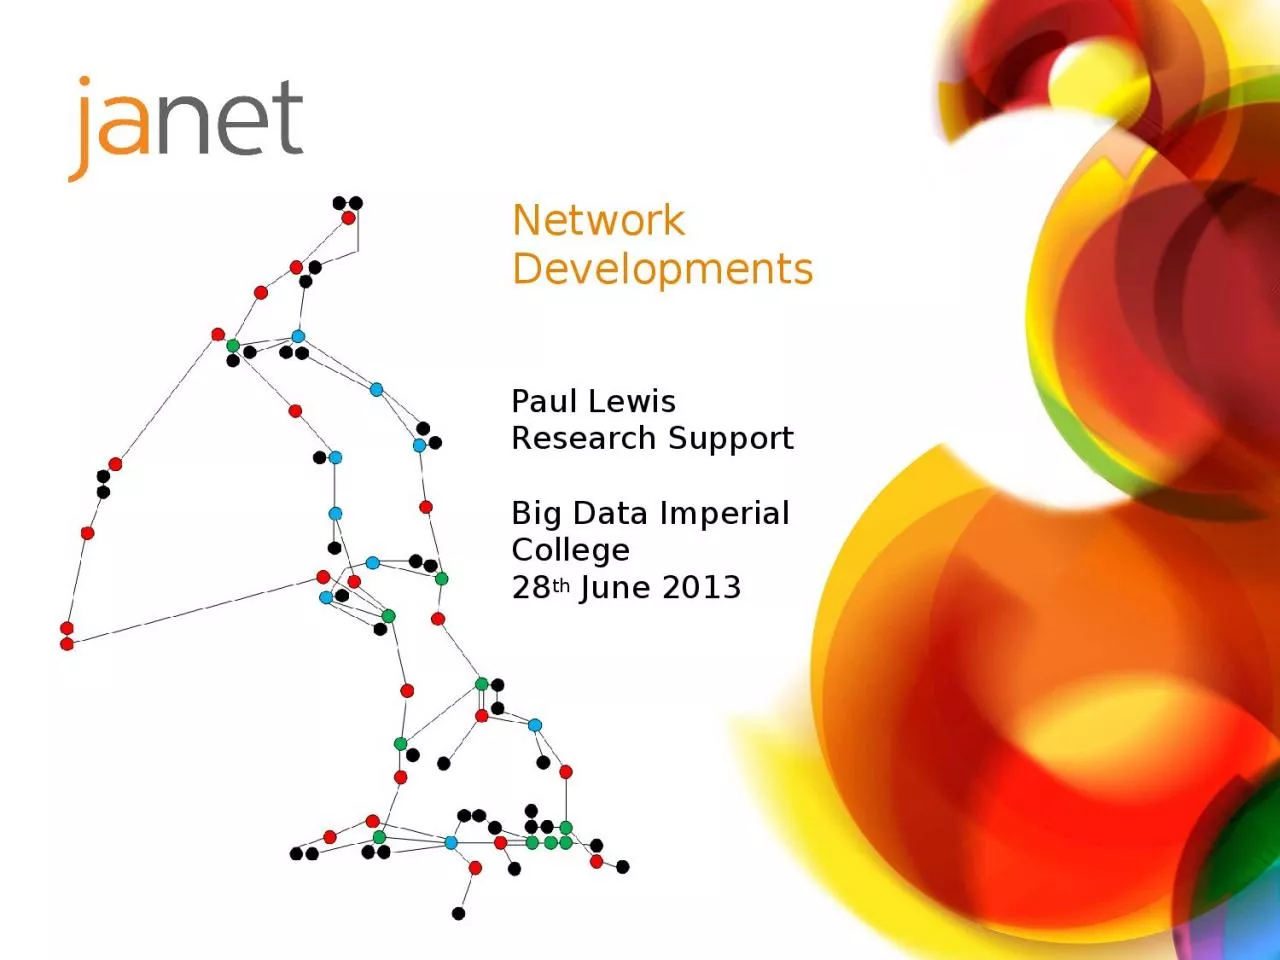 Paul Lewis Research Support